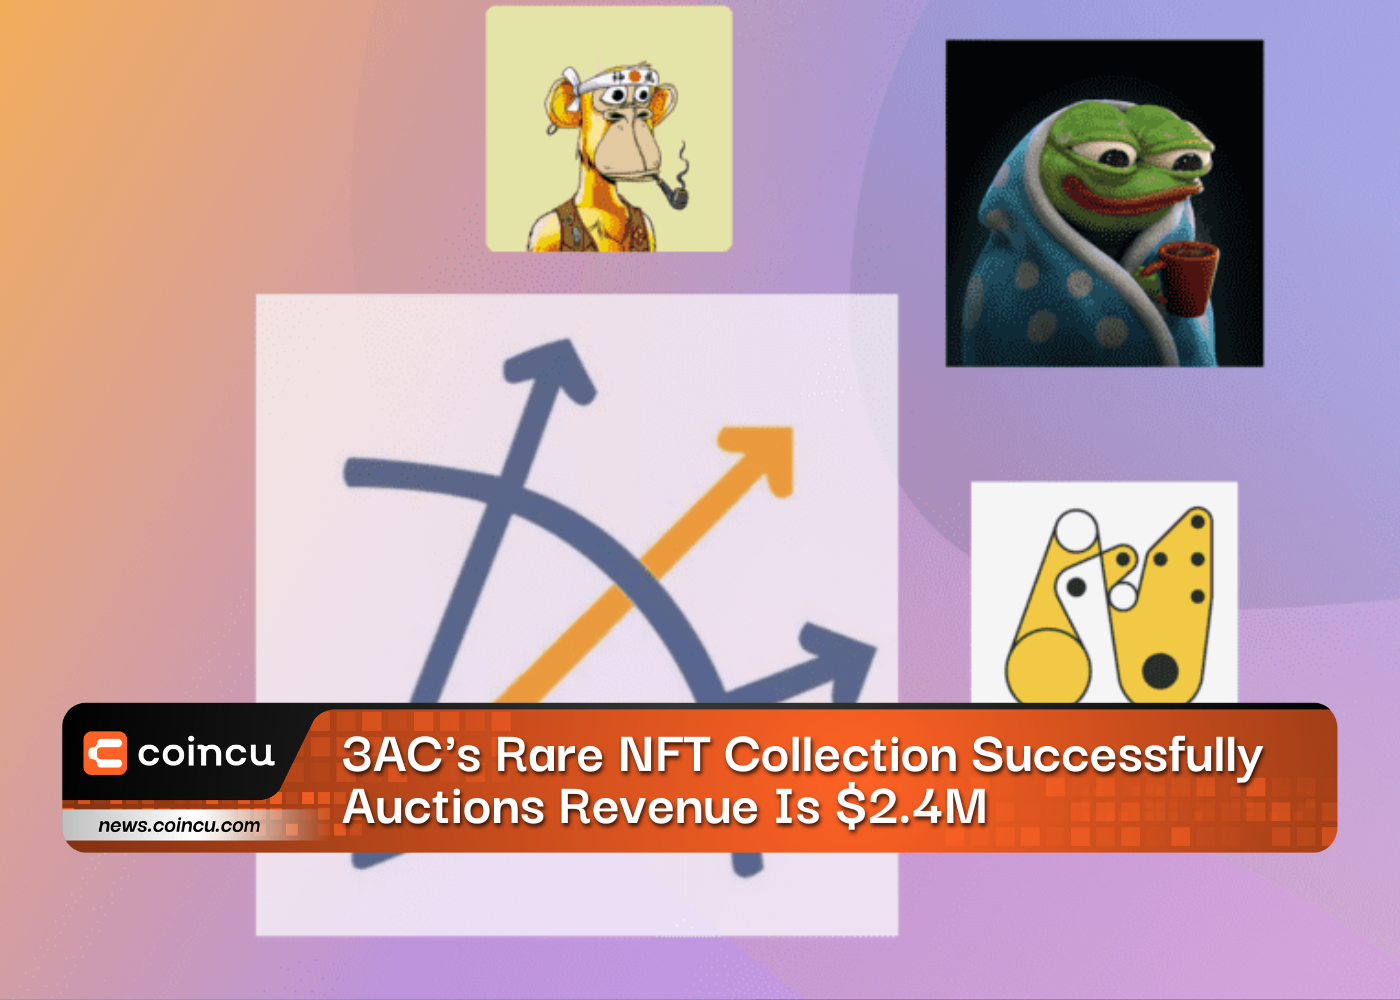 3AC's Rare NFT Collection Successfully Auctions Revenue Is $2.4M